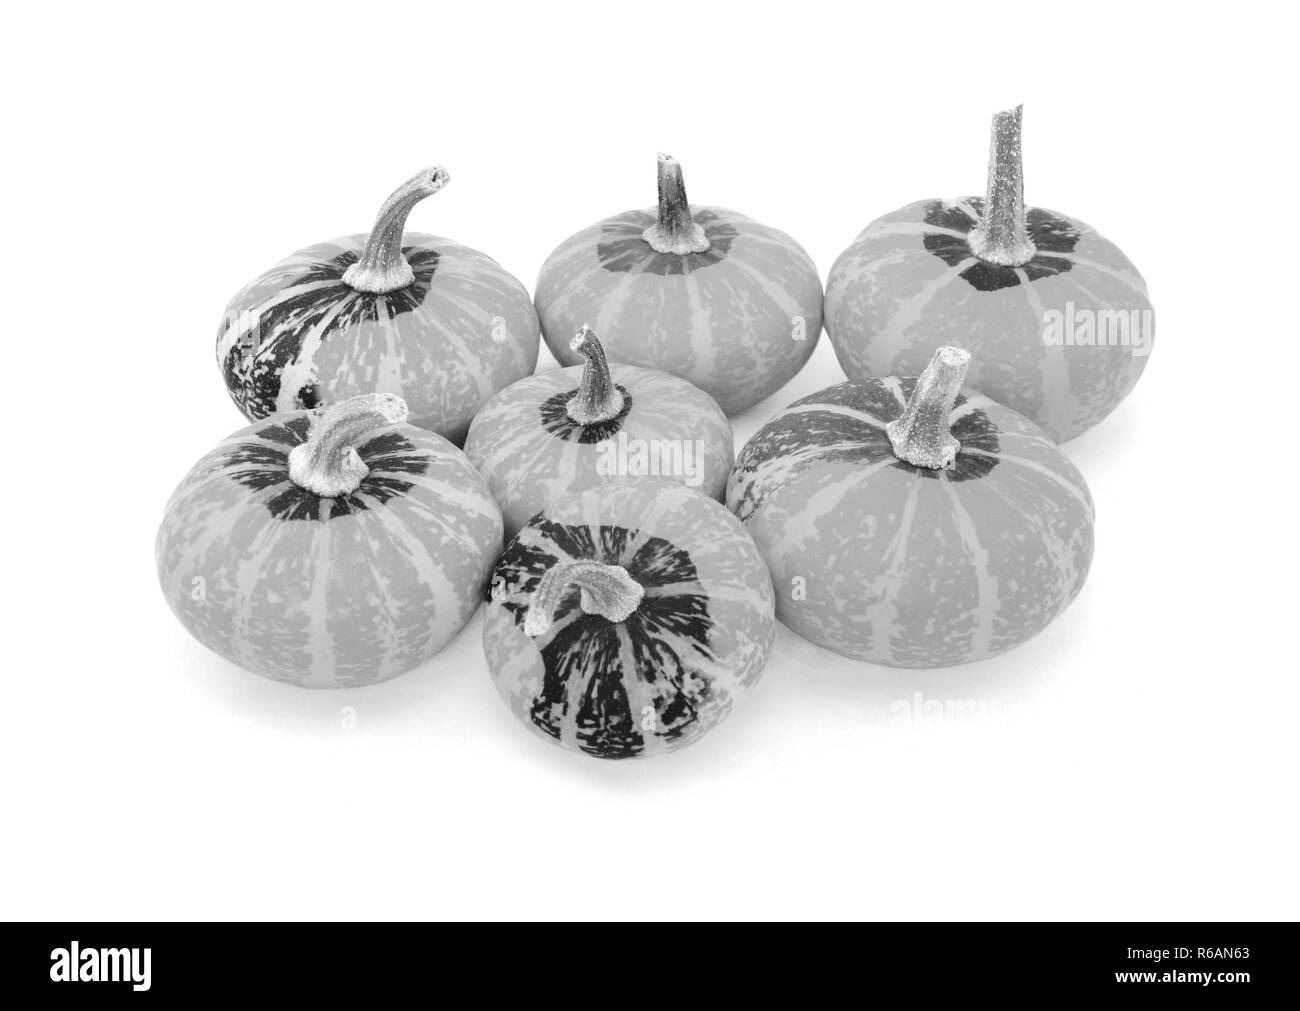 Group of seven small disc-shaped ornamental gourds Stock Photo